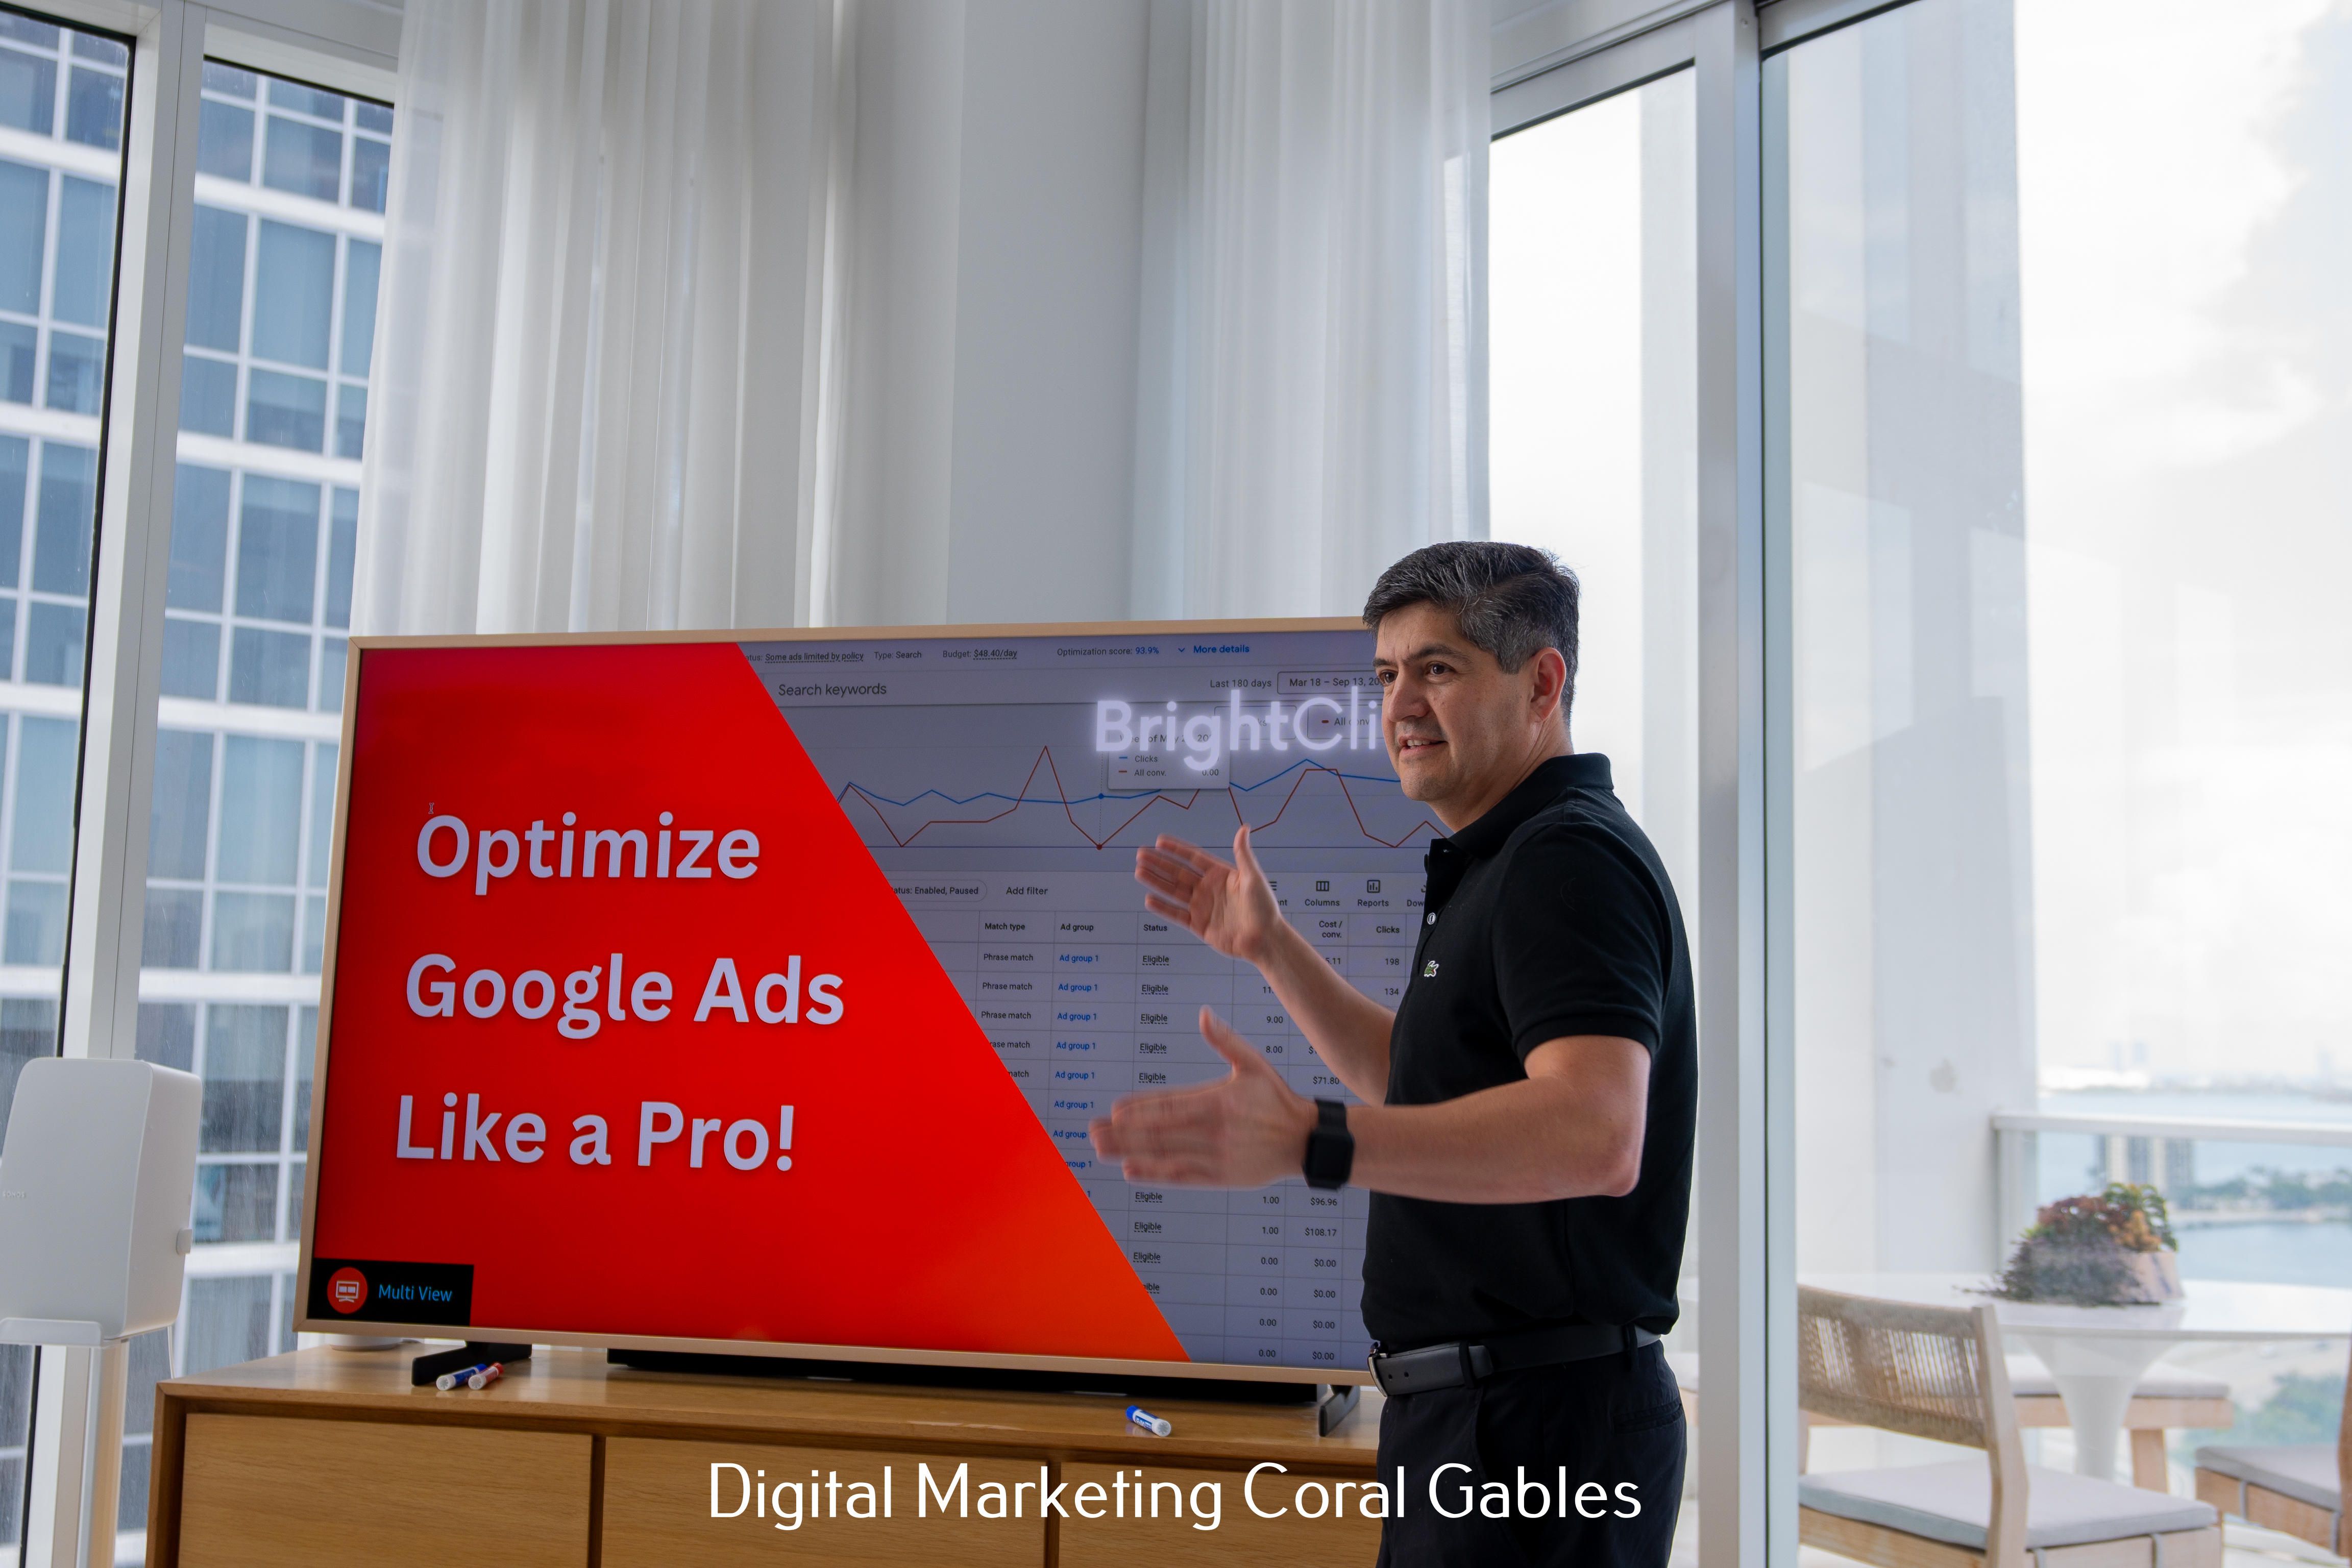 Bright Click Digital Marketing Explains the Power of SEO for Small Businesses